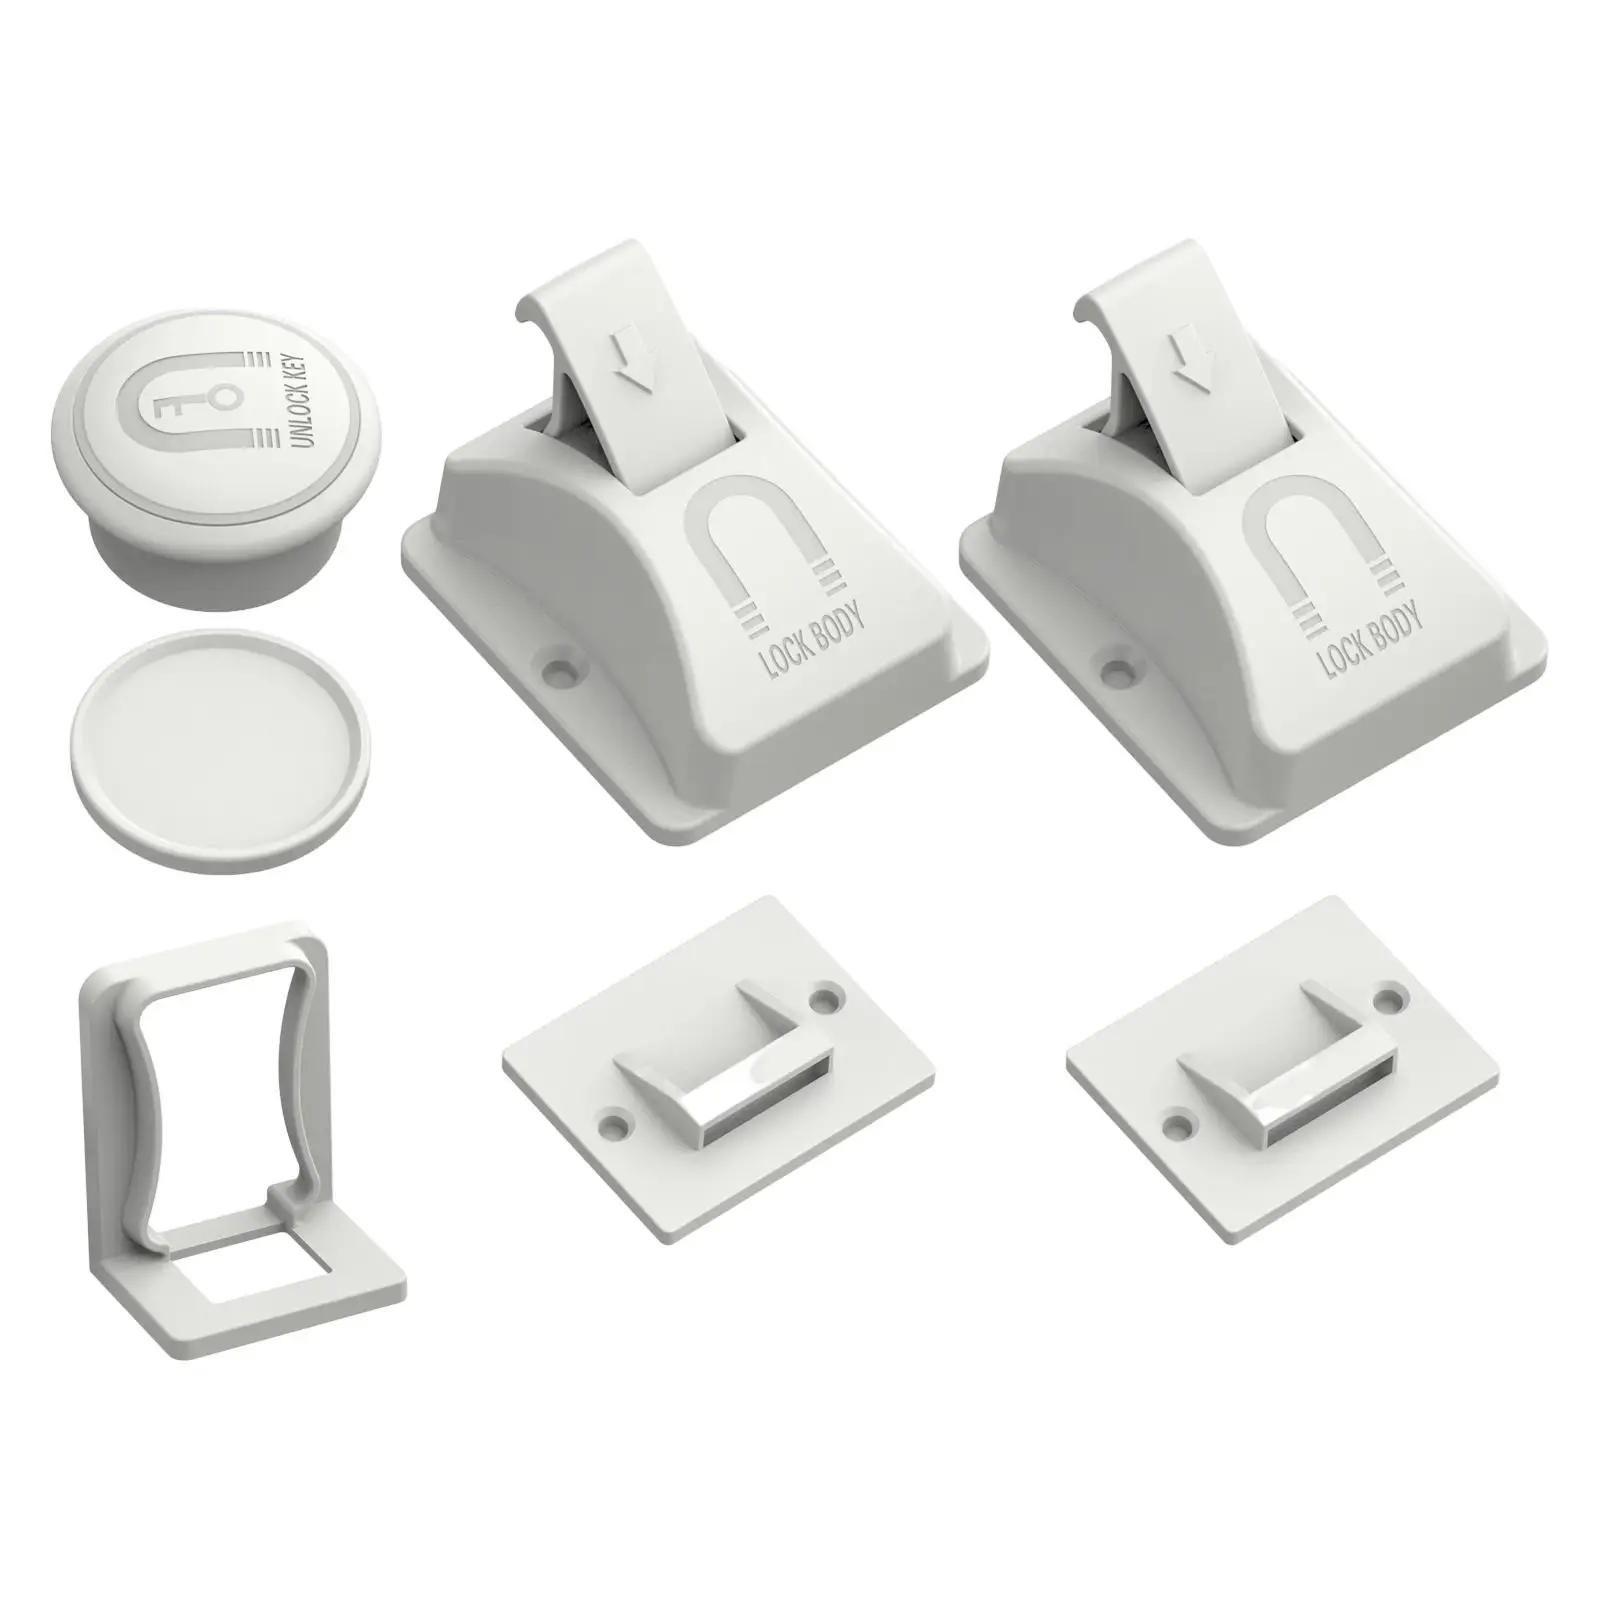 Child Safety latches No Screws or Drilling Child Locks for Cabinets